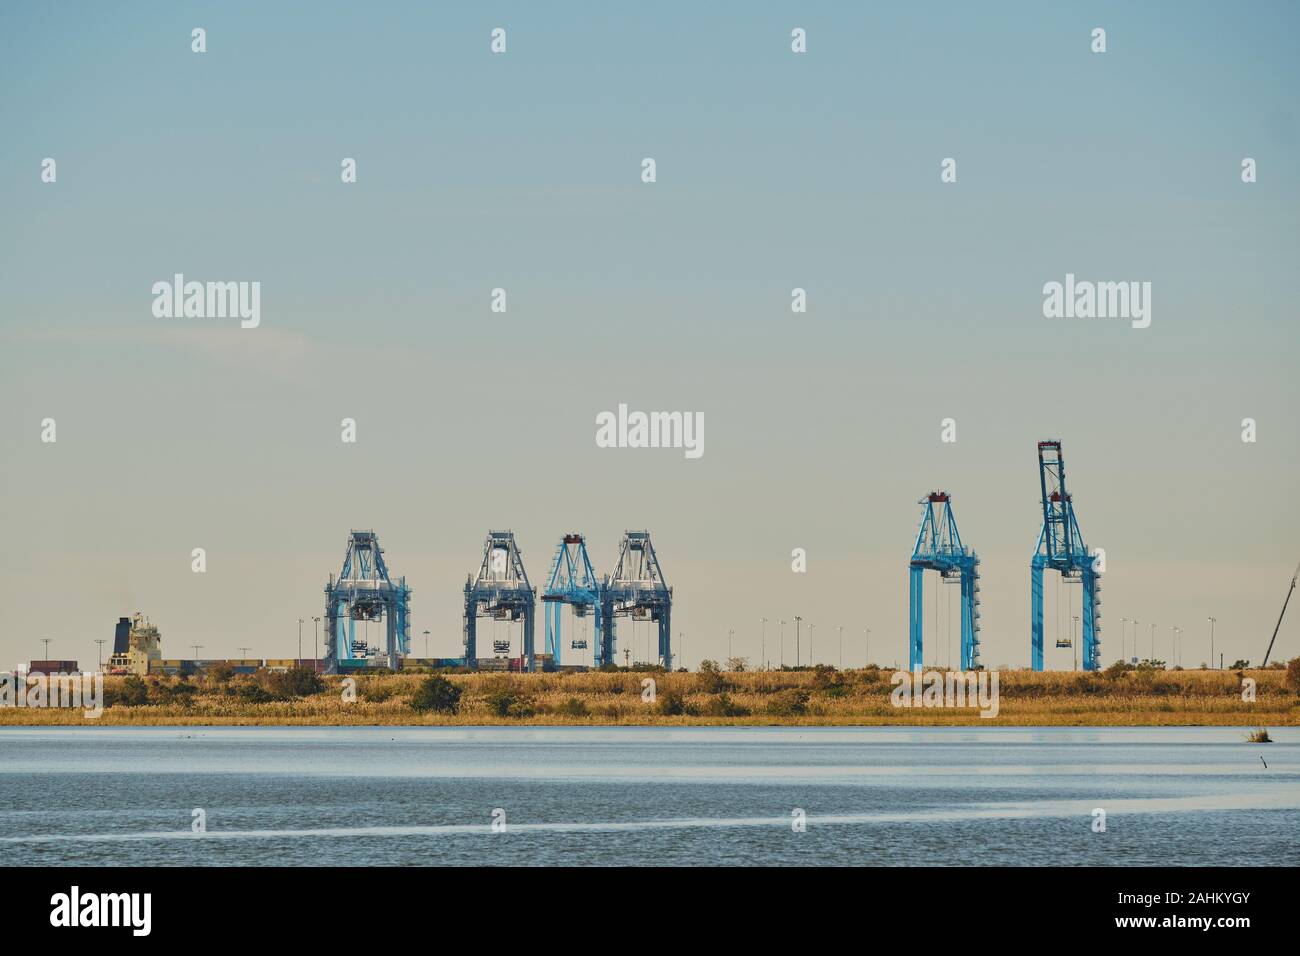 Shipyard docks for container ships with large cranes to load and unload a container ship in the port of Mobile Alabama, USA. Stock Photo